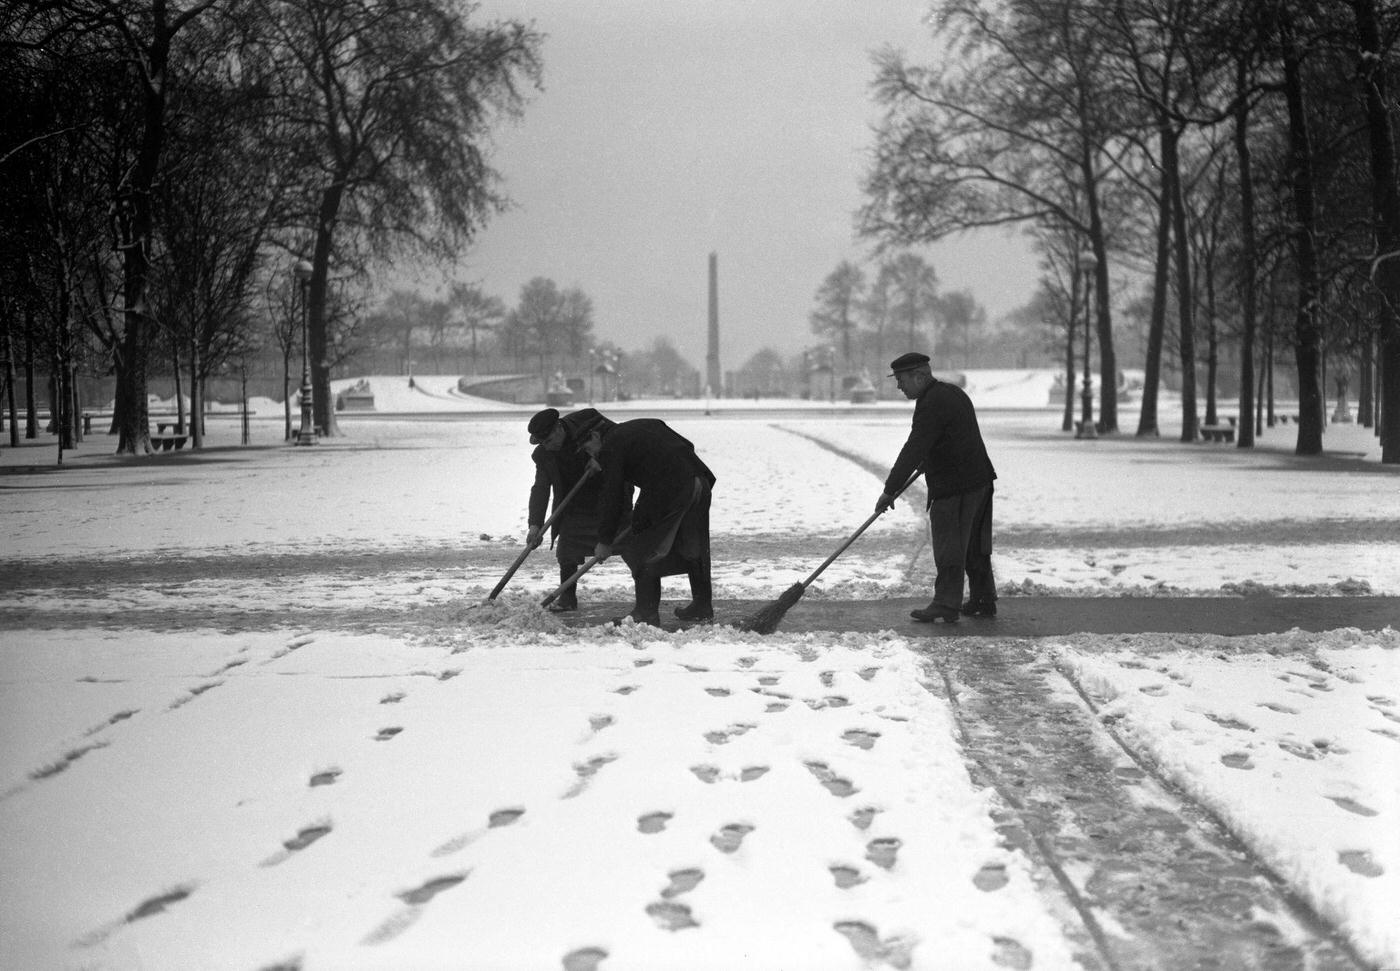 Snowstorm In Paris: City Workers Clearing Snow, February 15, 1952.